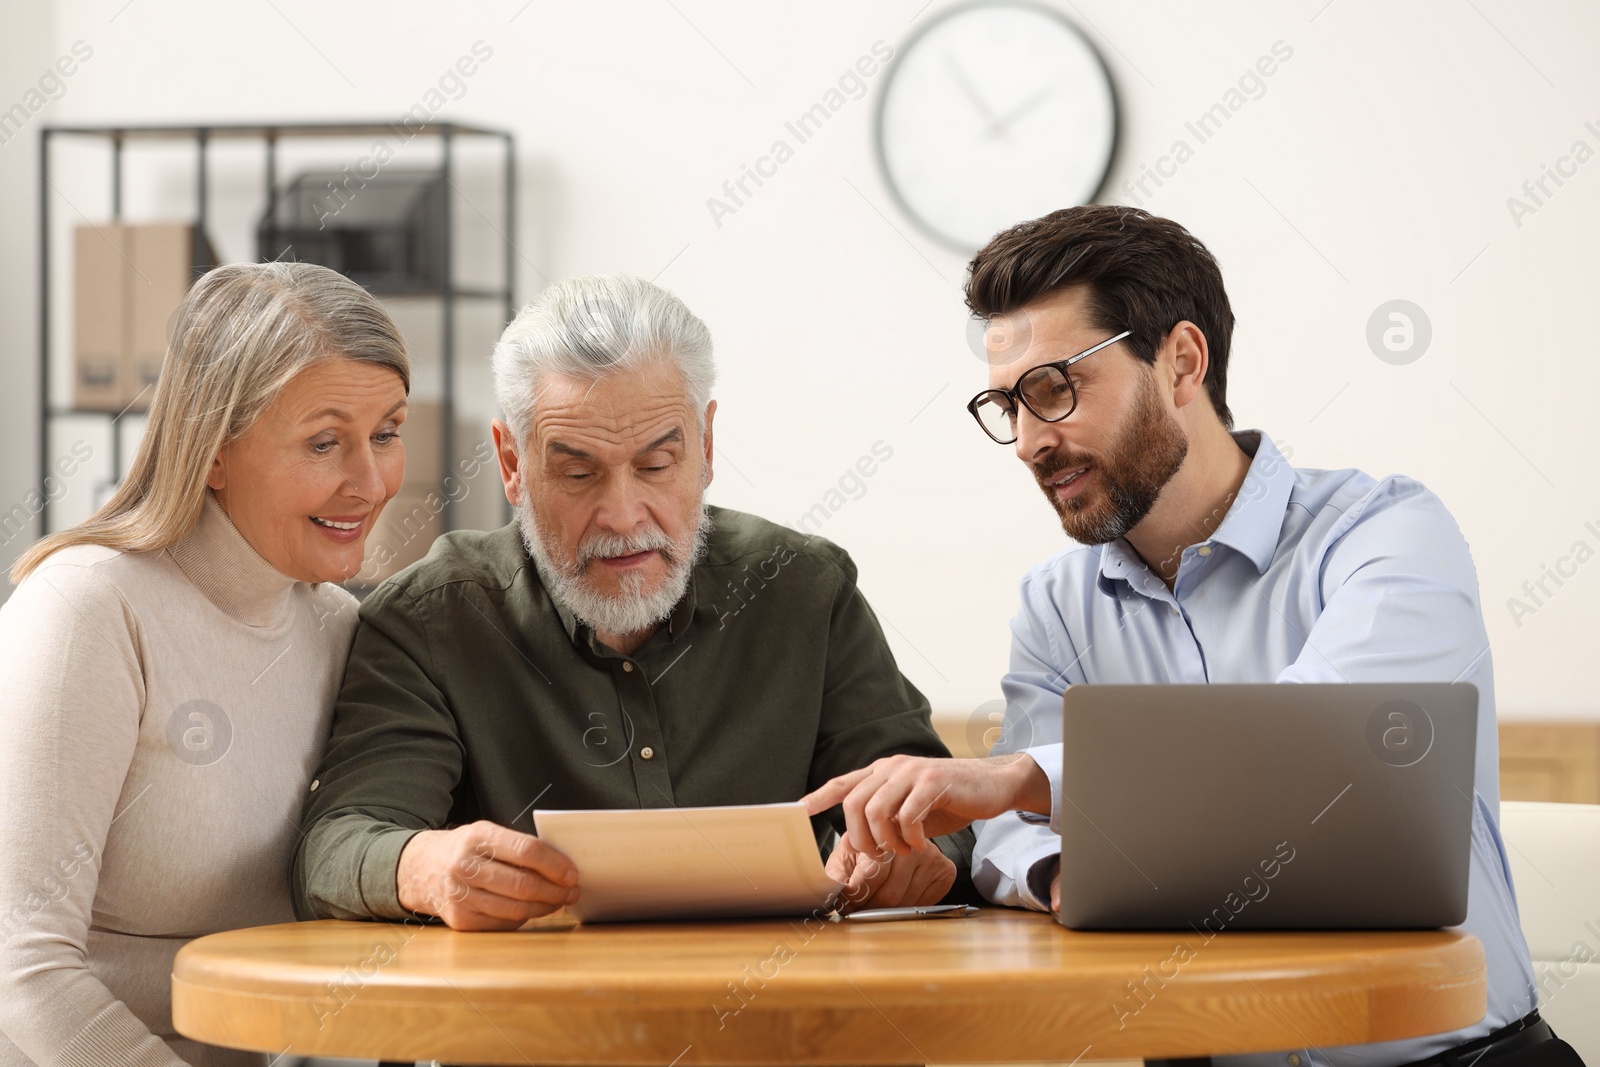 Photo of Notary consulting senior couple about Last Will and Testament in office